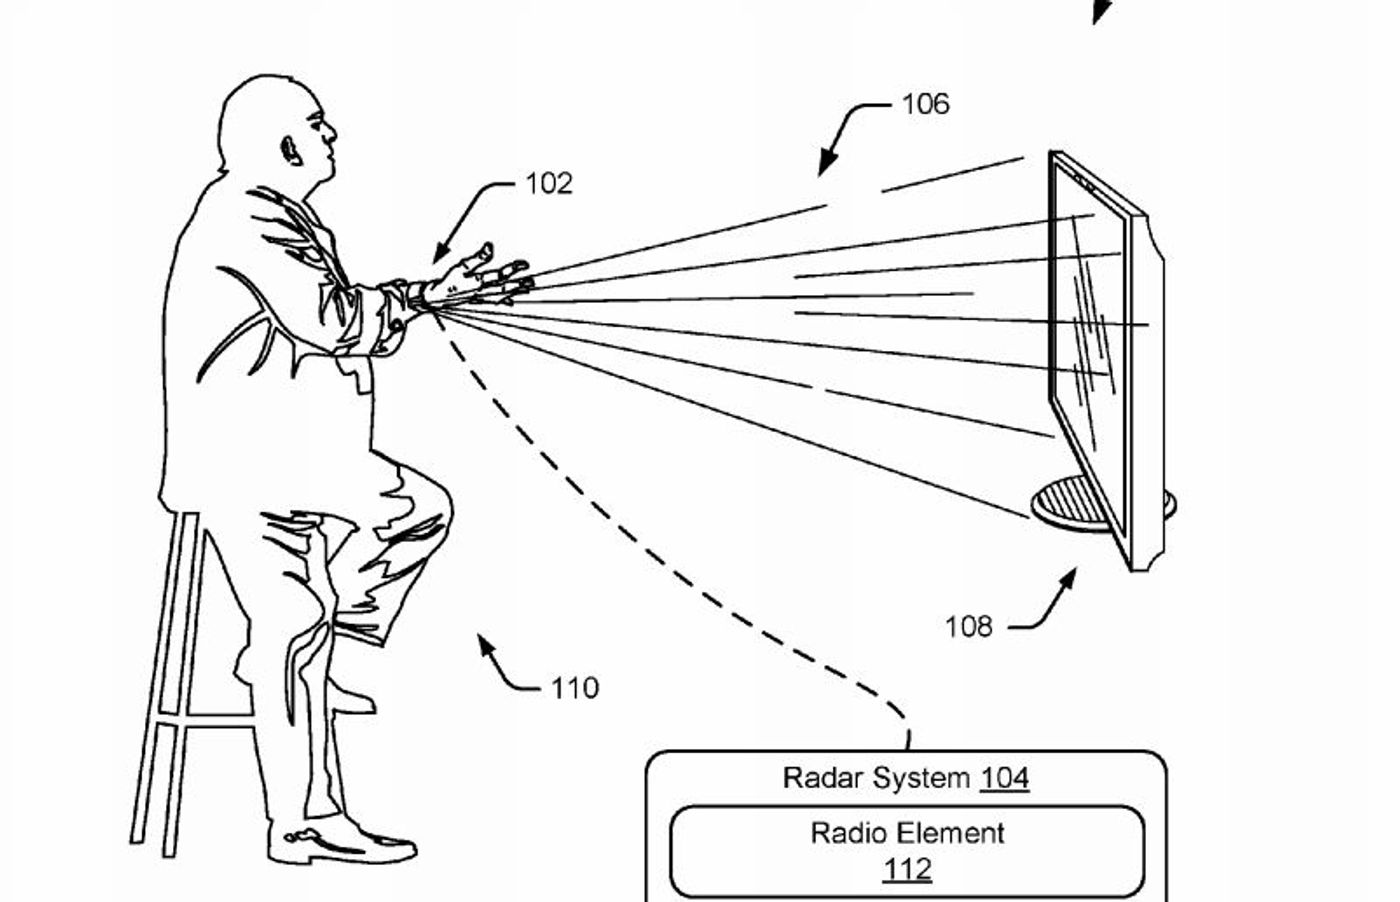 image from Google's patent, credit: Google